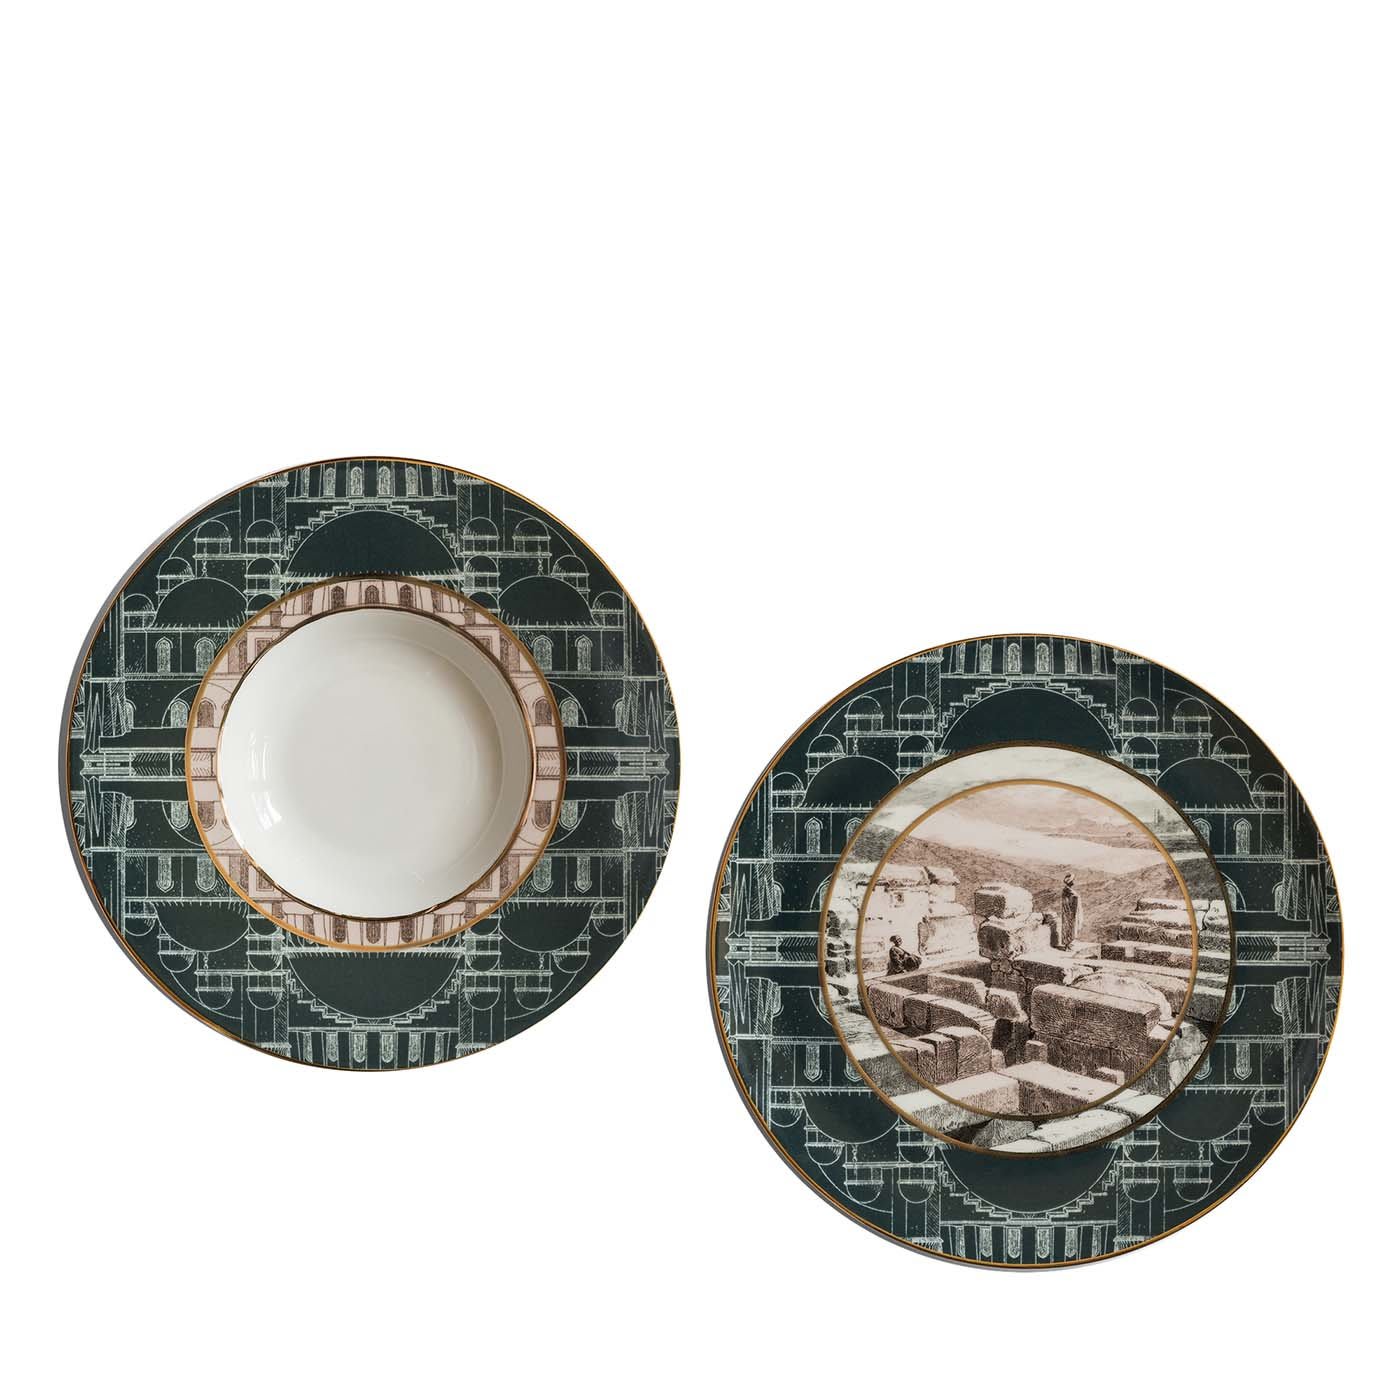 Lebanon 1 Dinner Plate and Soup Plate - Grand Tour by Vito Nesta